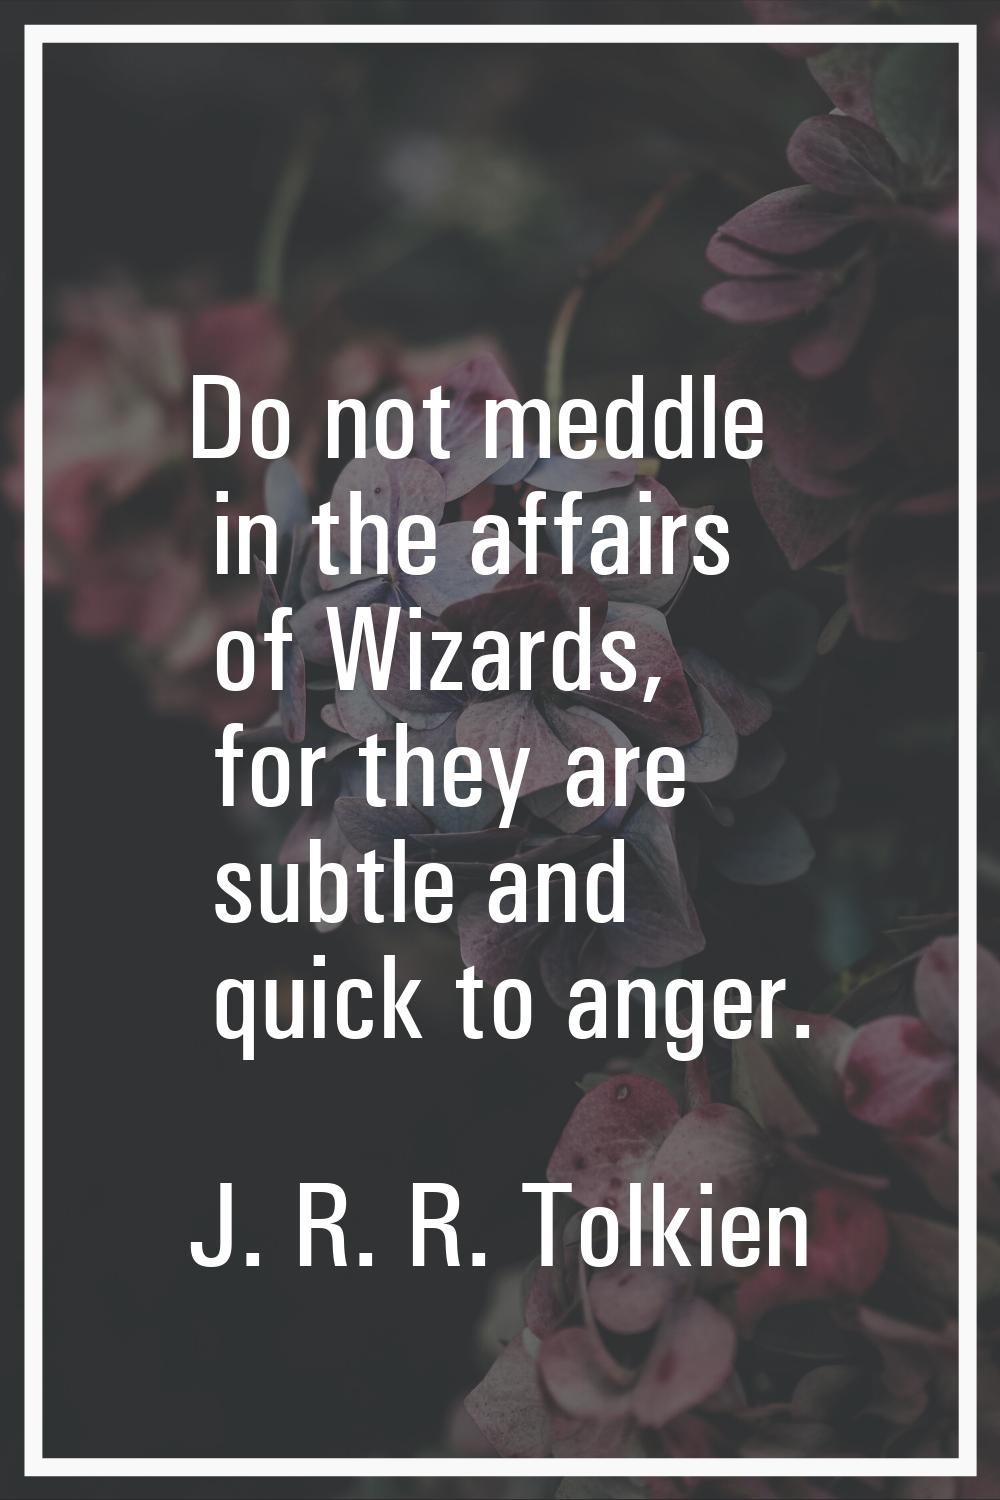 Do not meddle in the affairs of Wizards, for they are subtle and quick to anger.